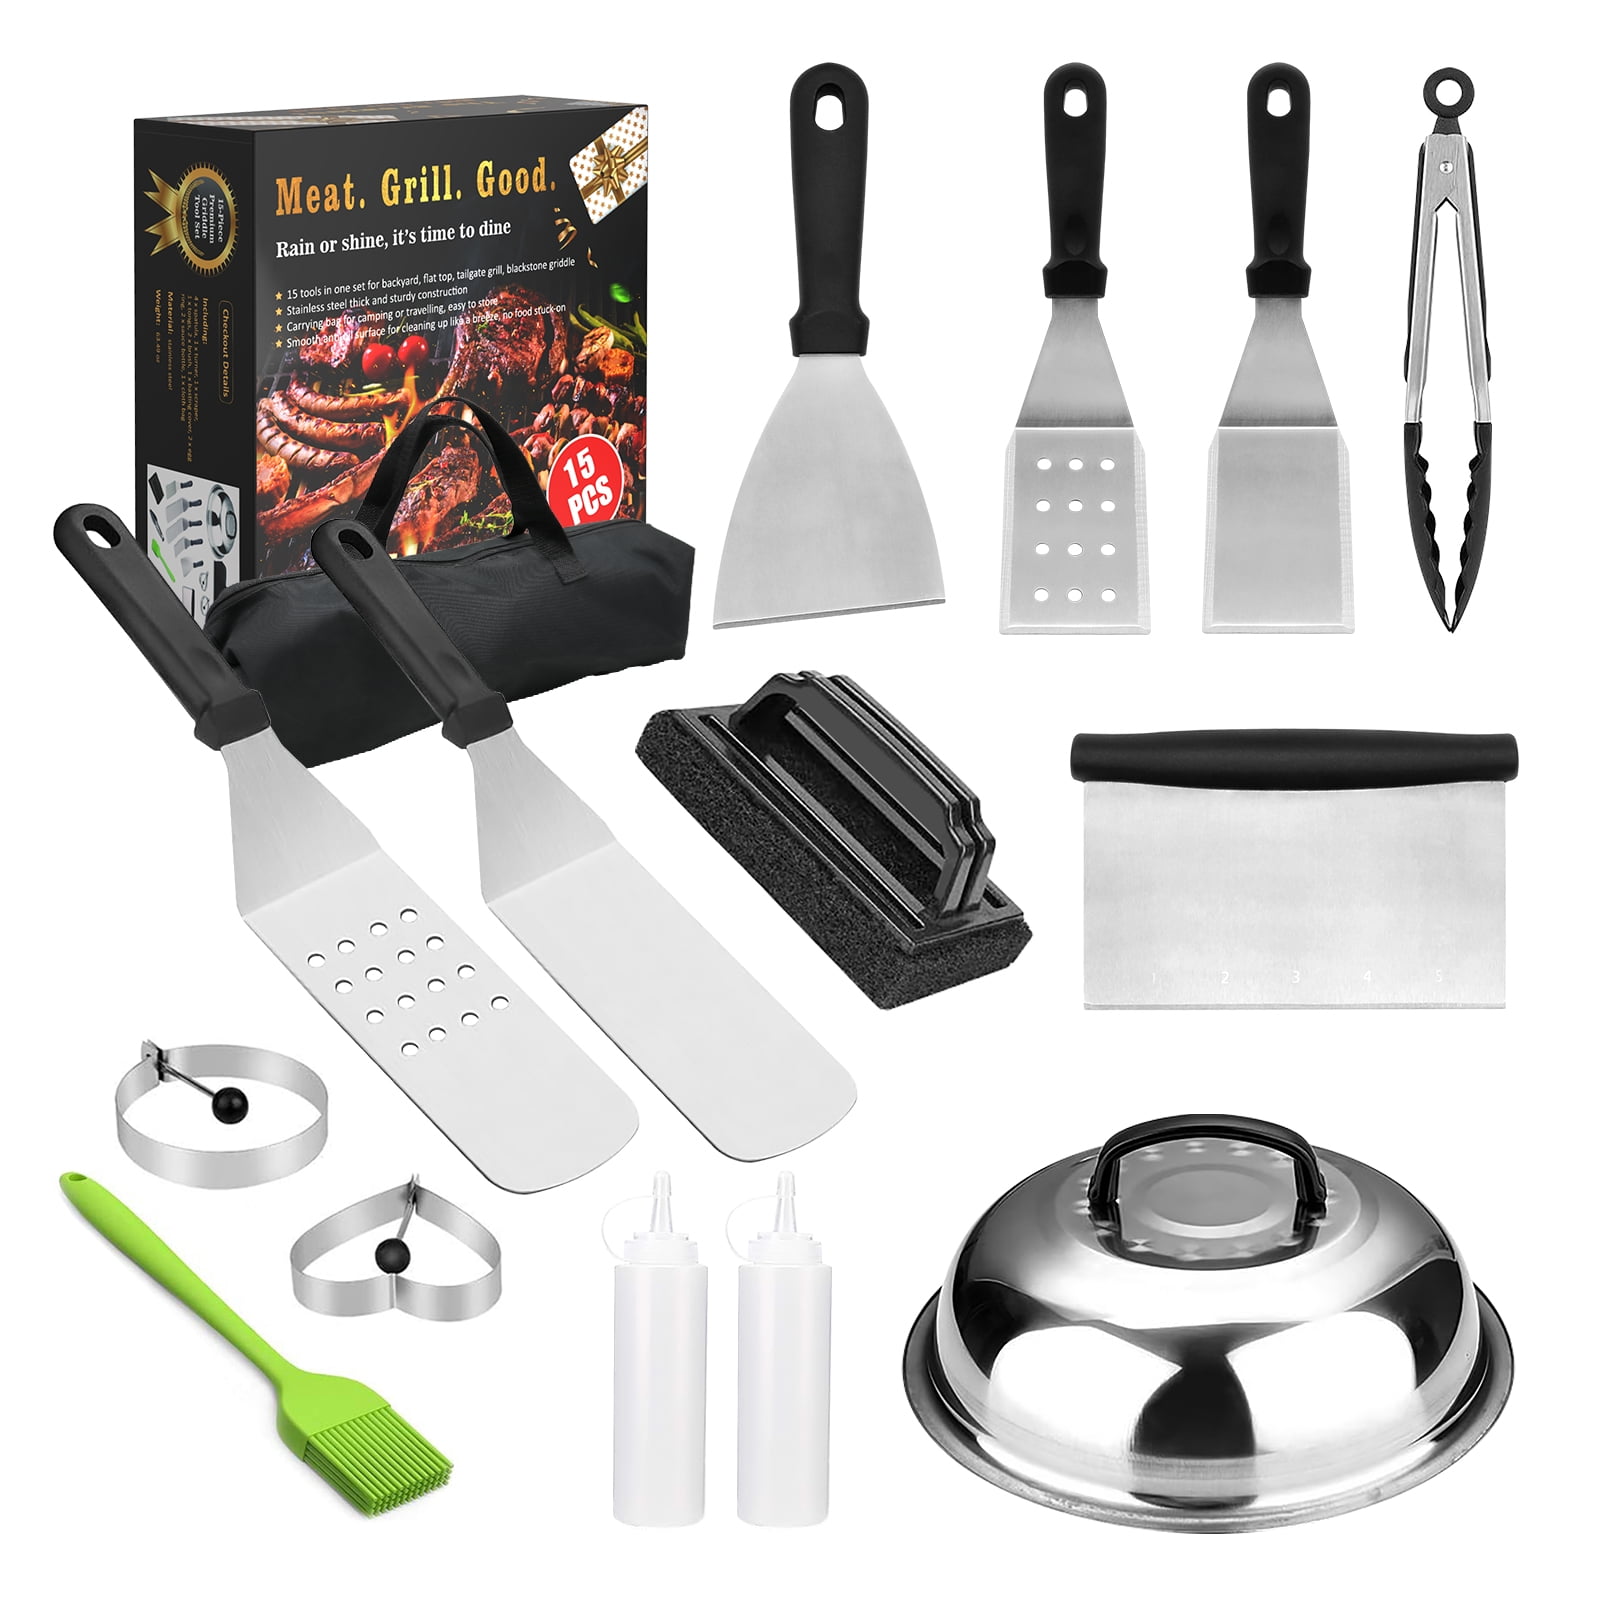 ETEPEHI Grill Accessories, Stainless Steel Grip Barbecue Accessories for Outdoor Camping, 15 Flat Top Griddle Accessories Kit with Spatula, Basting Cover, Scraper, Bottle, Tongs, Egg Rings & Carry Bag